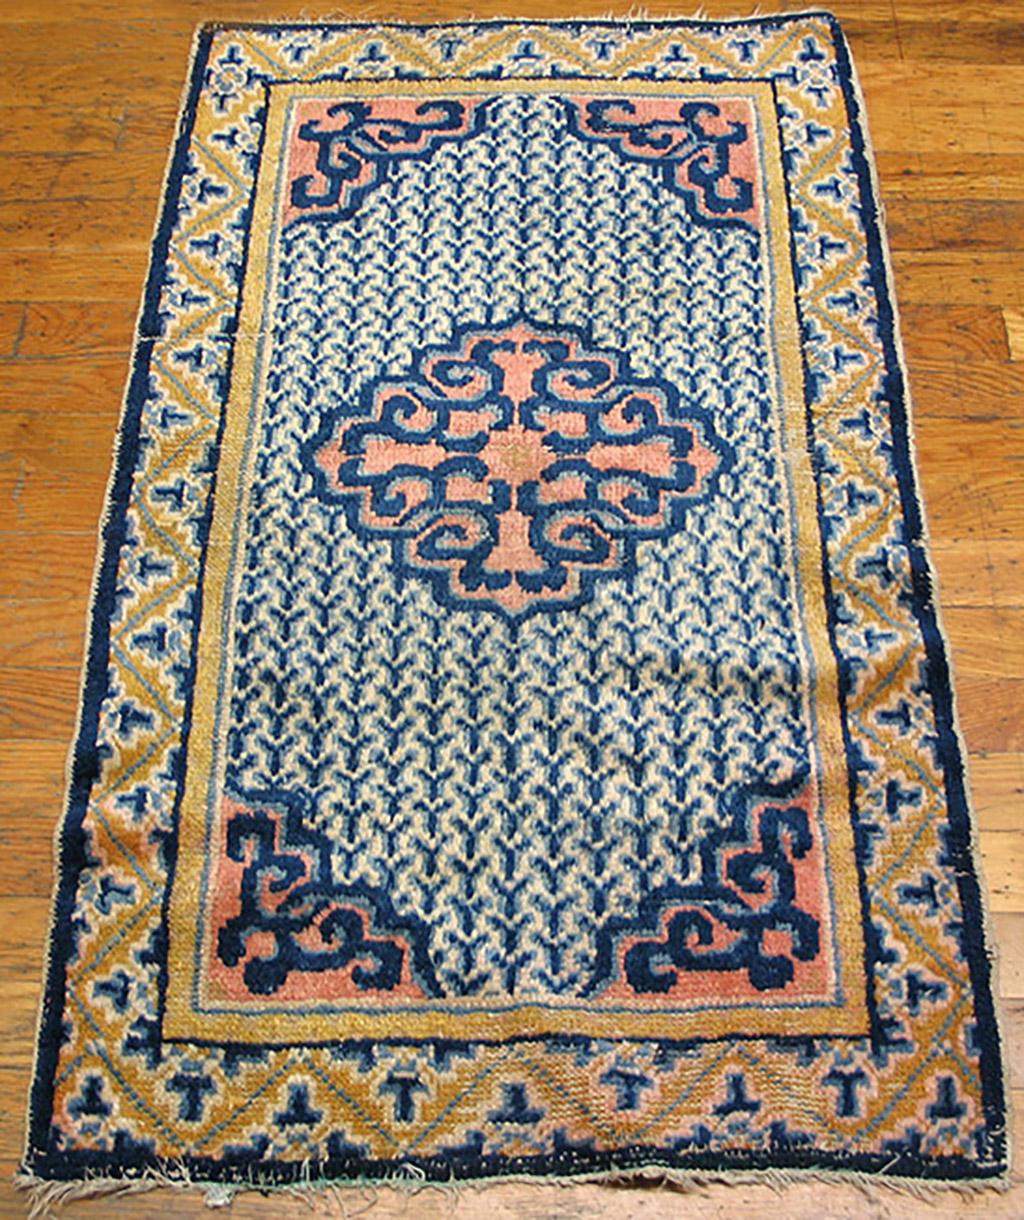 Early 19th Century Ningxia Rug ( 2' x 3'6'' - 60 x 108 )
The ivory field displays a giant lobed strap-work arabesque medallion with en suite corners, set on a “Y” shapes all-over pattern in 15 columns. A gold leafy zig-zag ornaments the main border